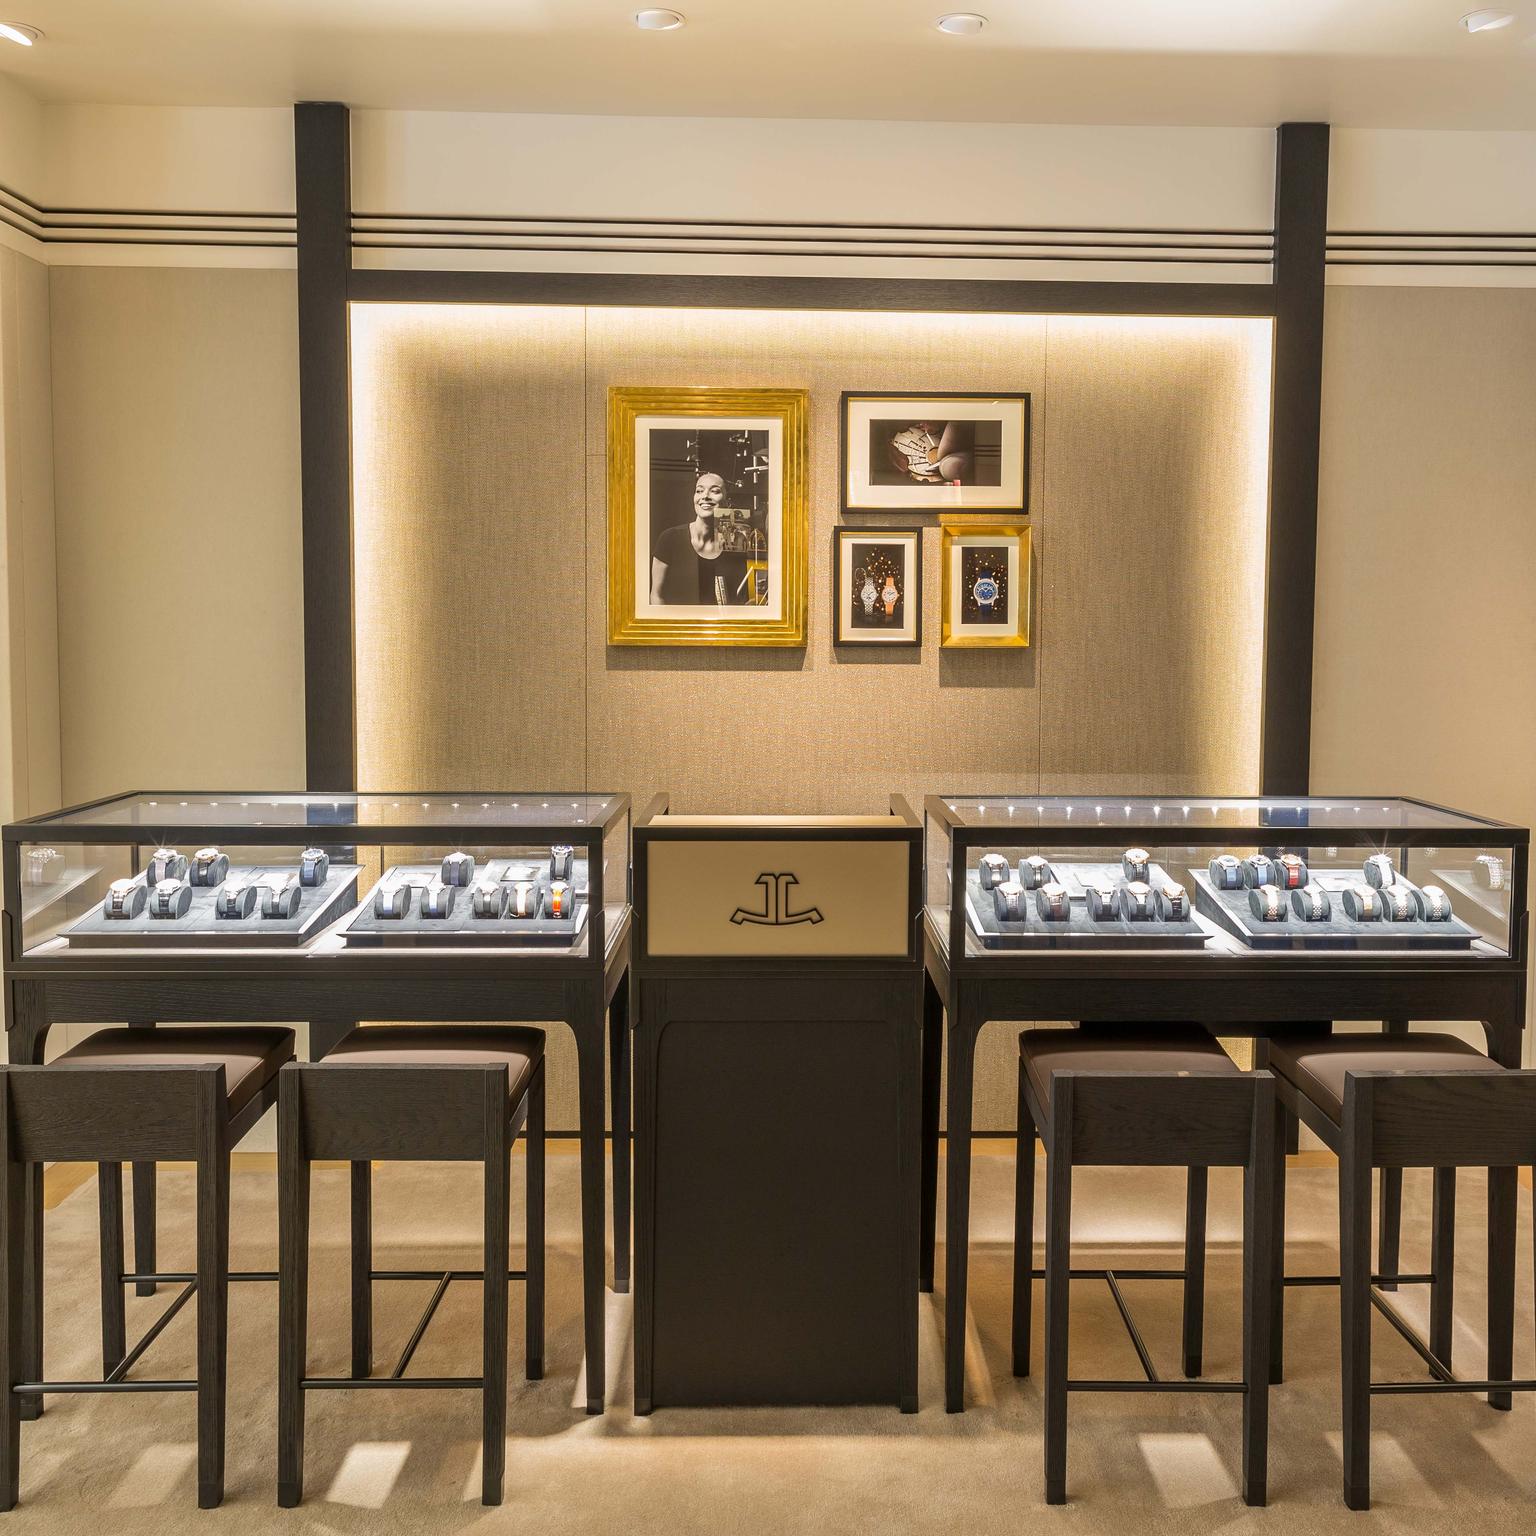 The warm sycamore wood, textured walls and flow of the rooms encapsulate Jaeger-LeCoultre's rich history, technological prowess and watchmaking mastery.